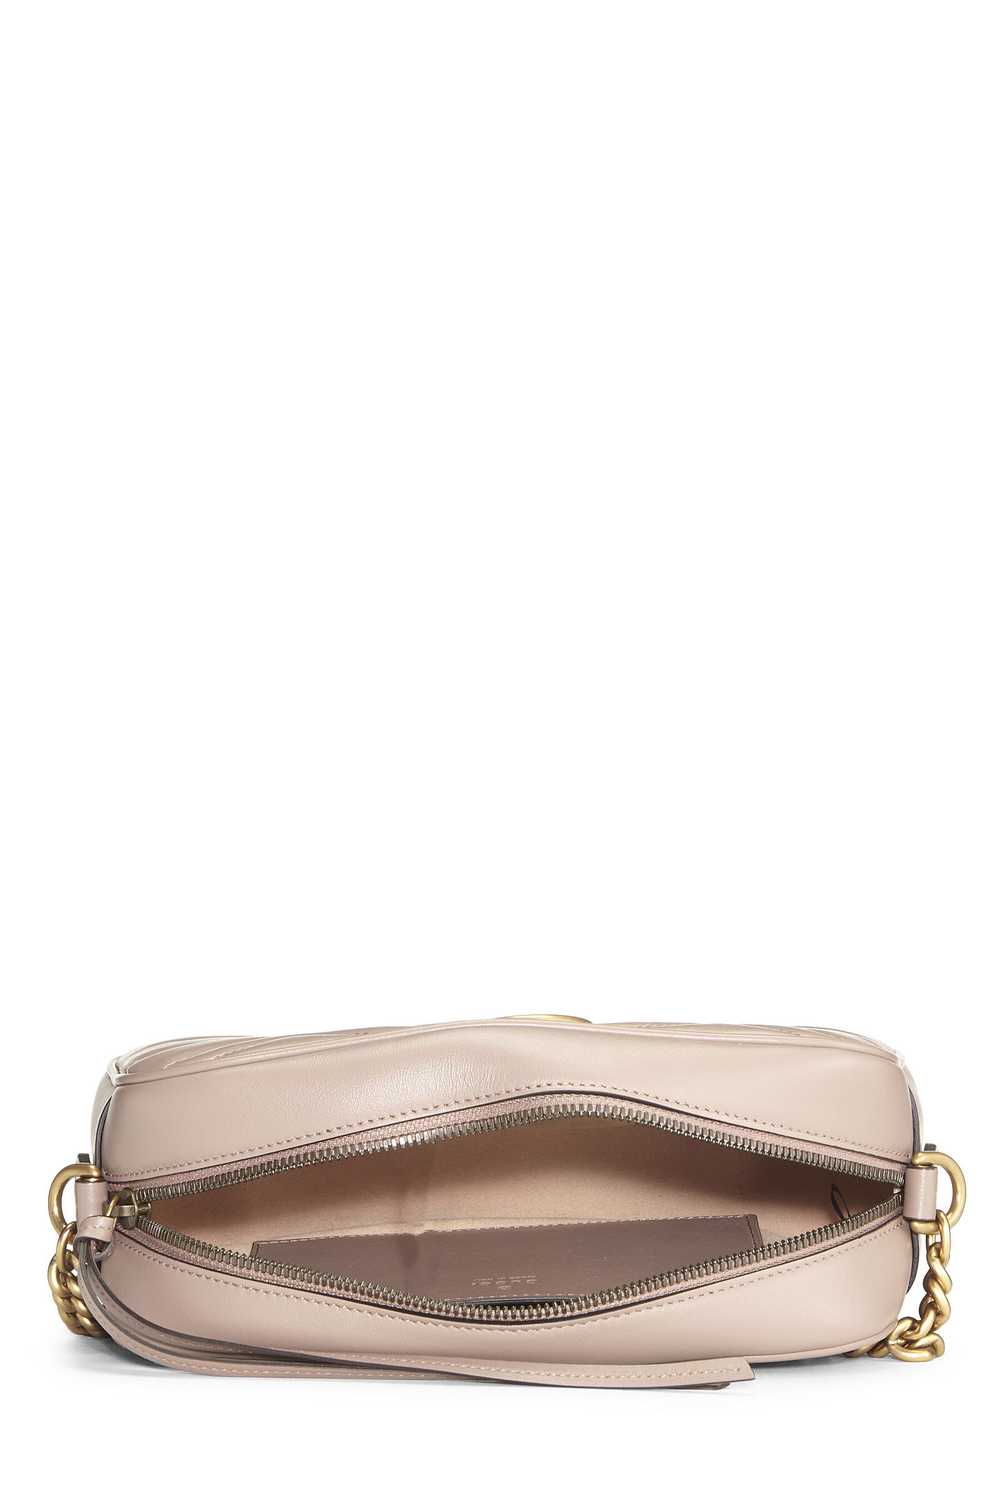 Pink Leather GG Marmont Crossbody - image 6